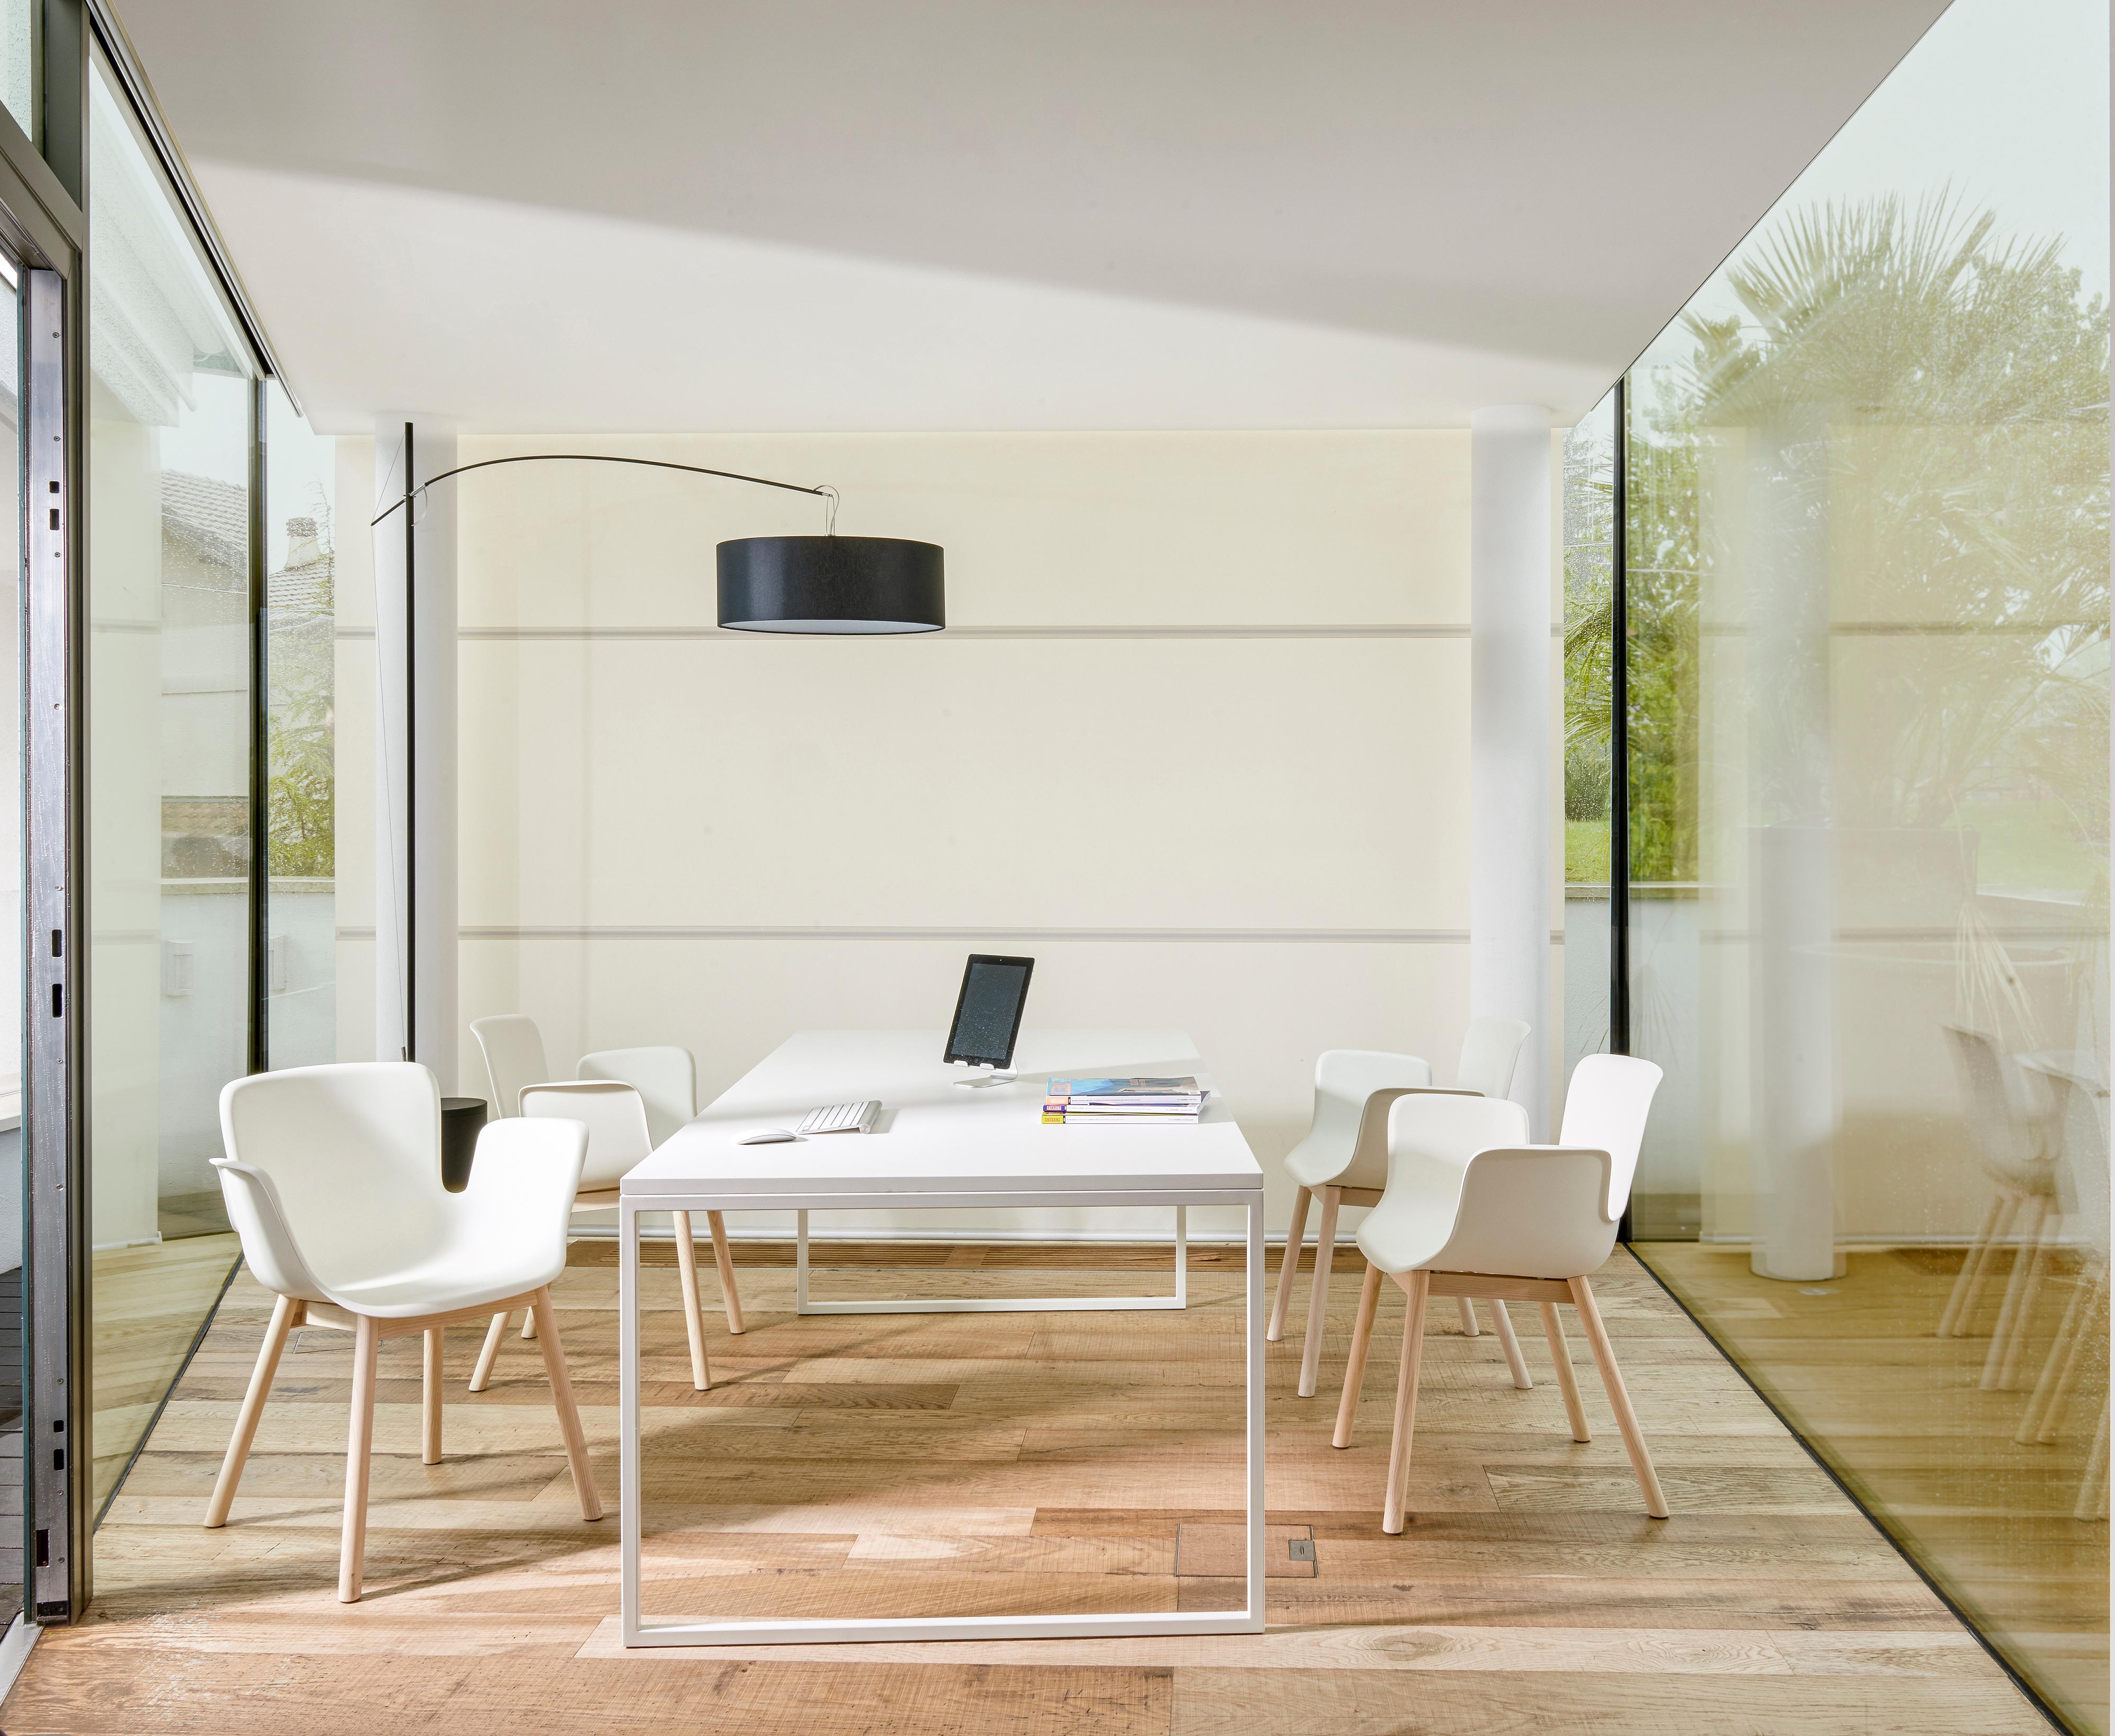 An ode to clean lines, the Fronzoni ’64 table embellishes settings with its absolute rigour and essential elegance. Austere and perfectly functional, the Fronzoni ’64 tables are the perfect expression of the designer’s vision, whereby geometry